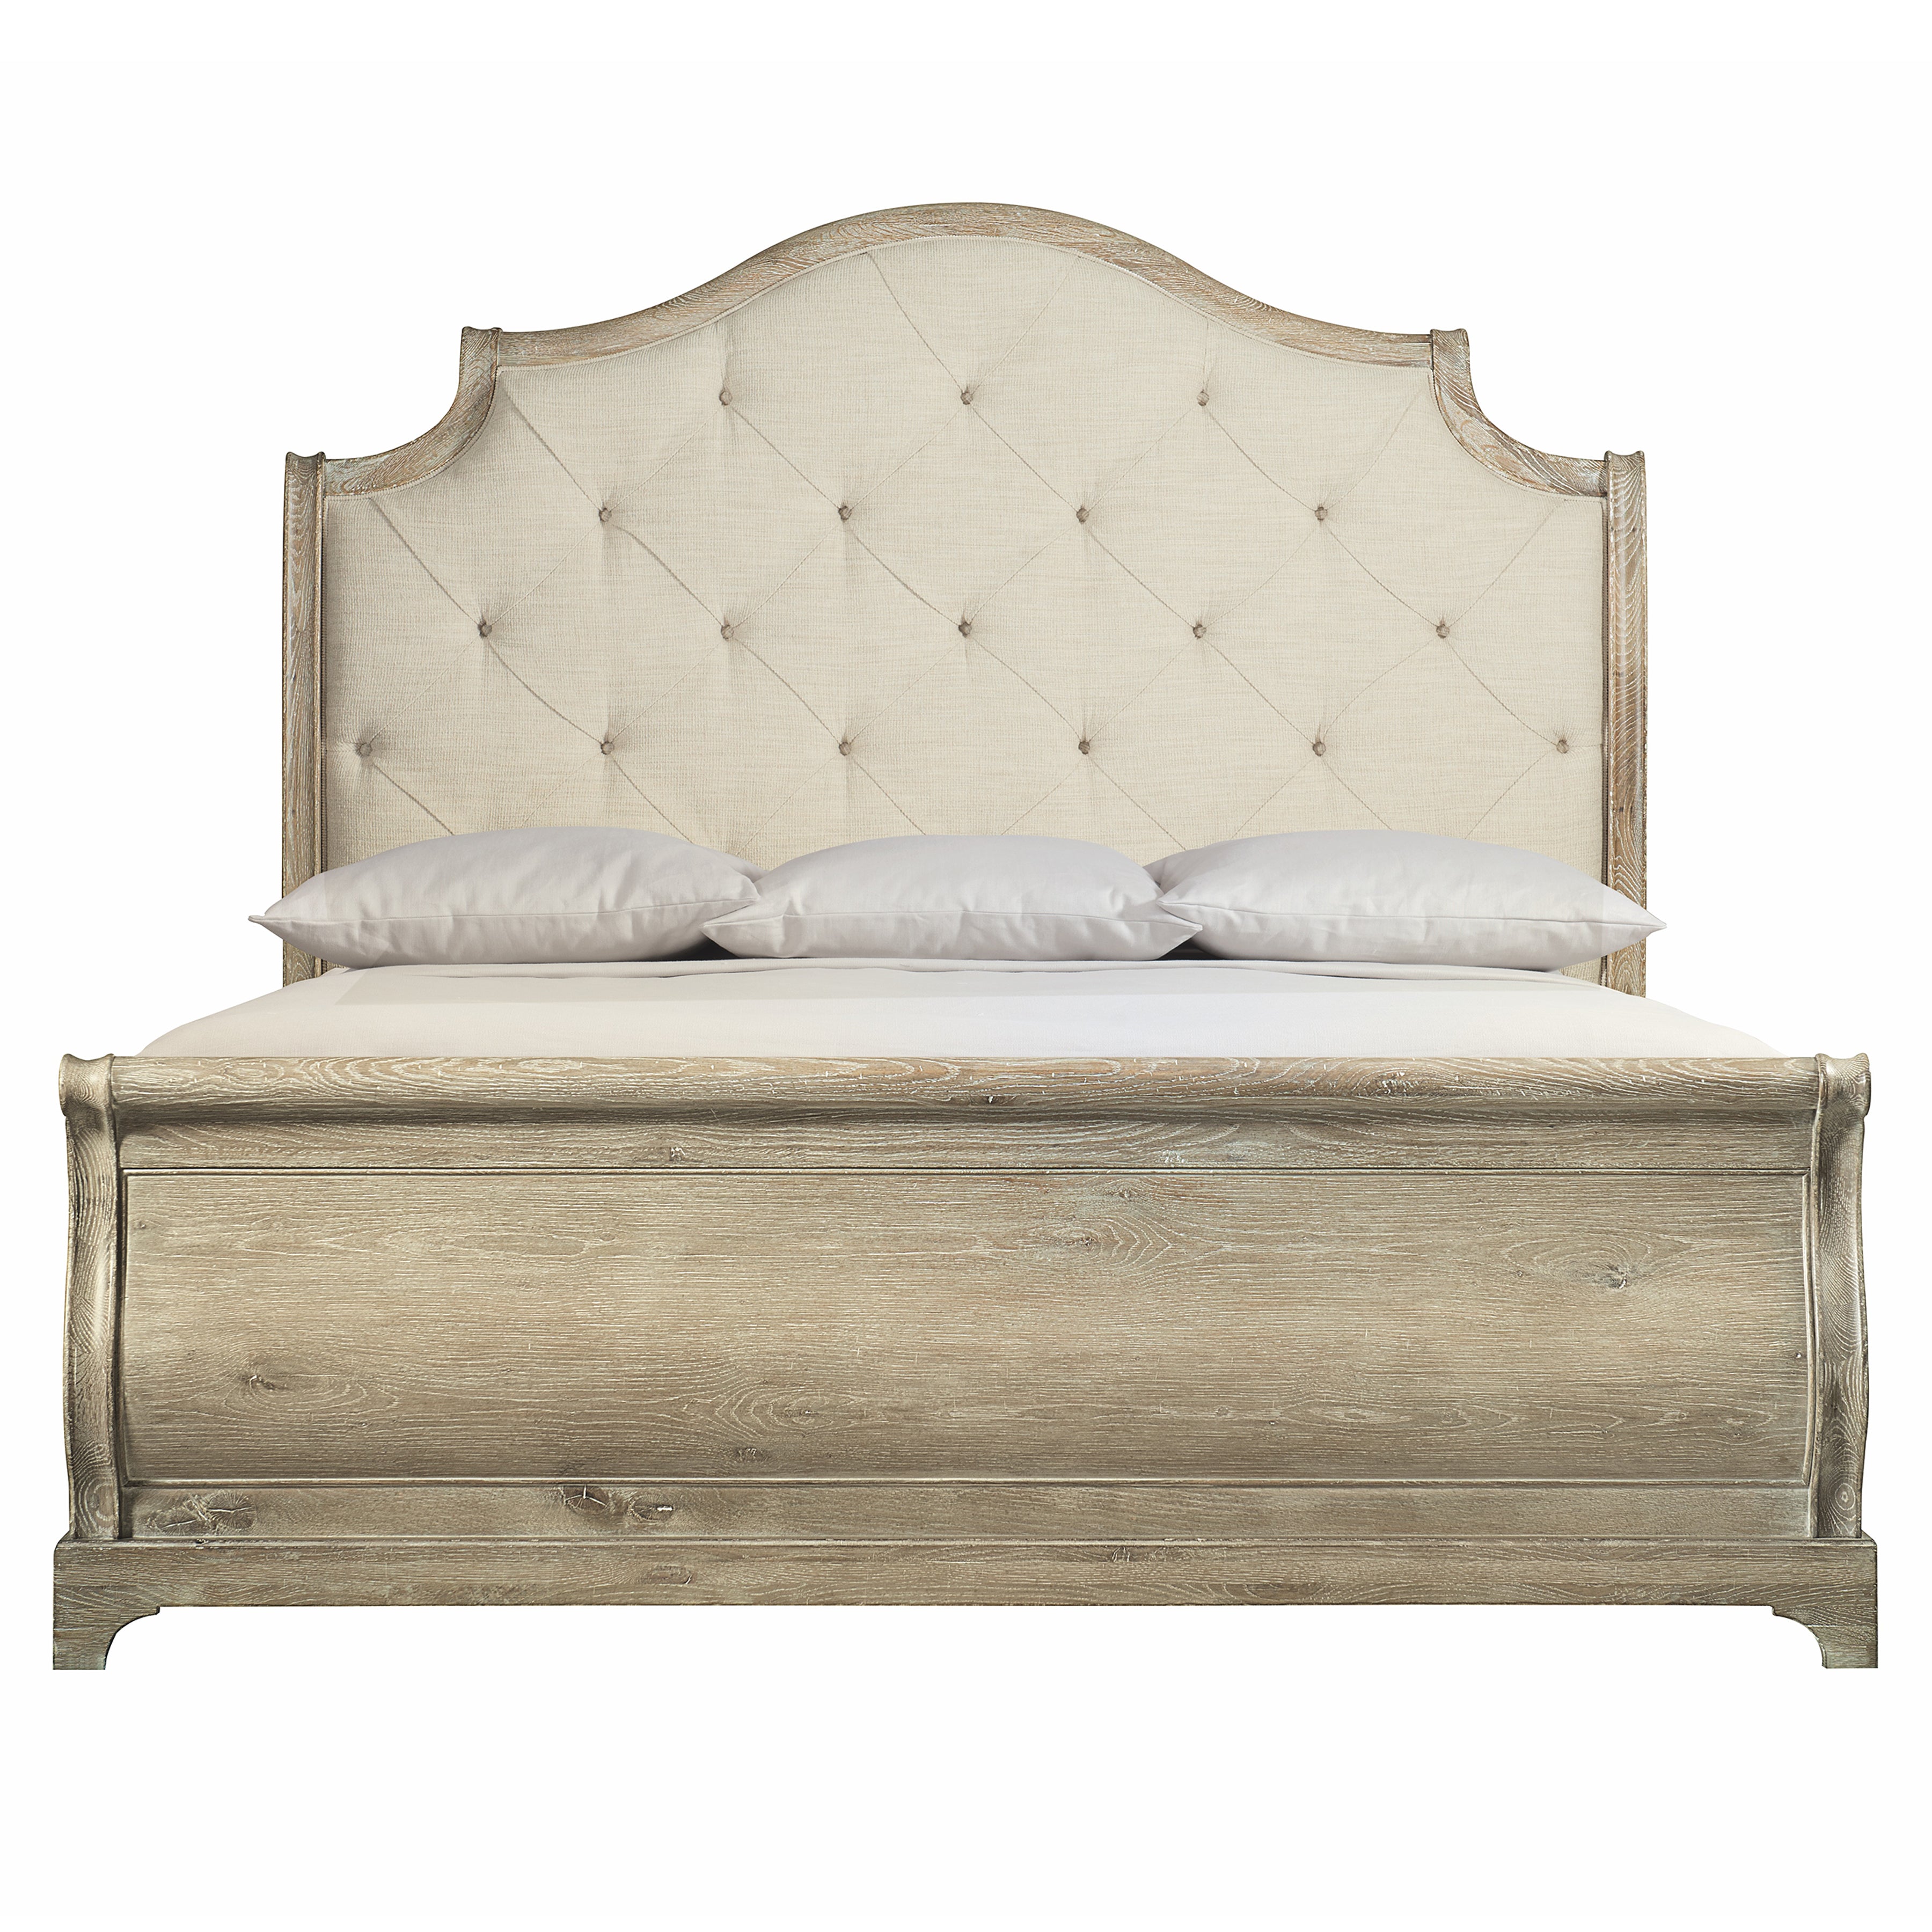 Rustic Patina Upholstered King Sleigh Bed in Sand Finish